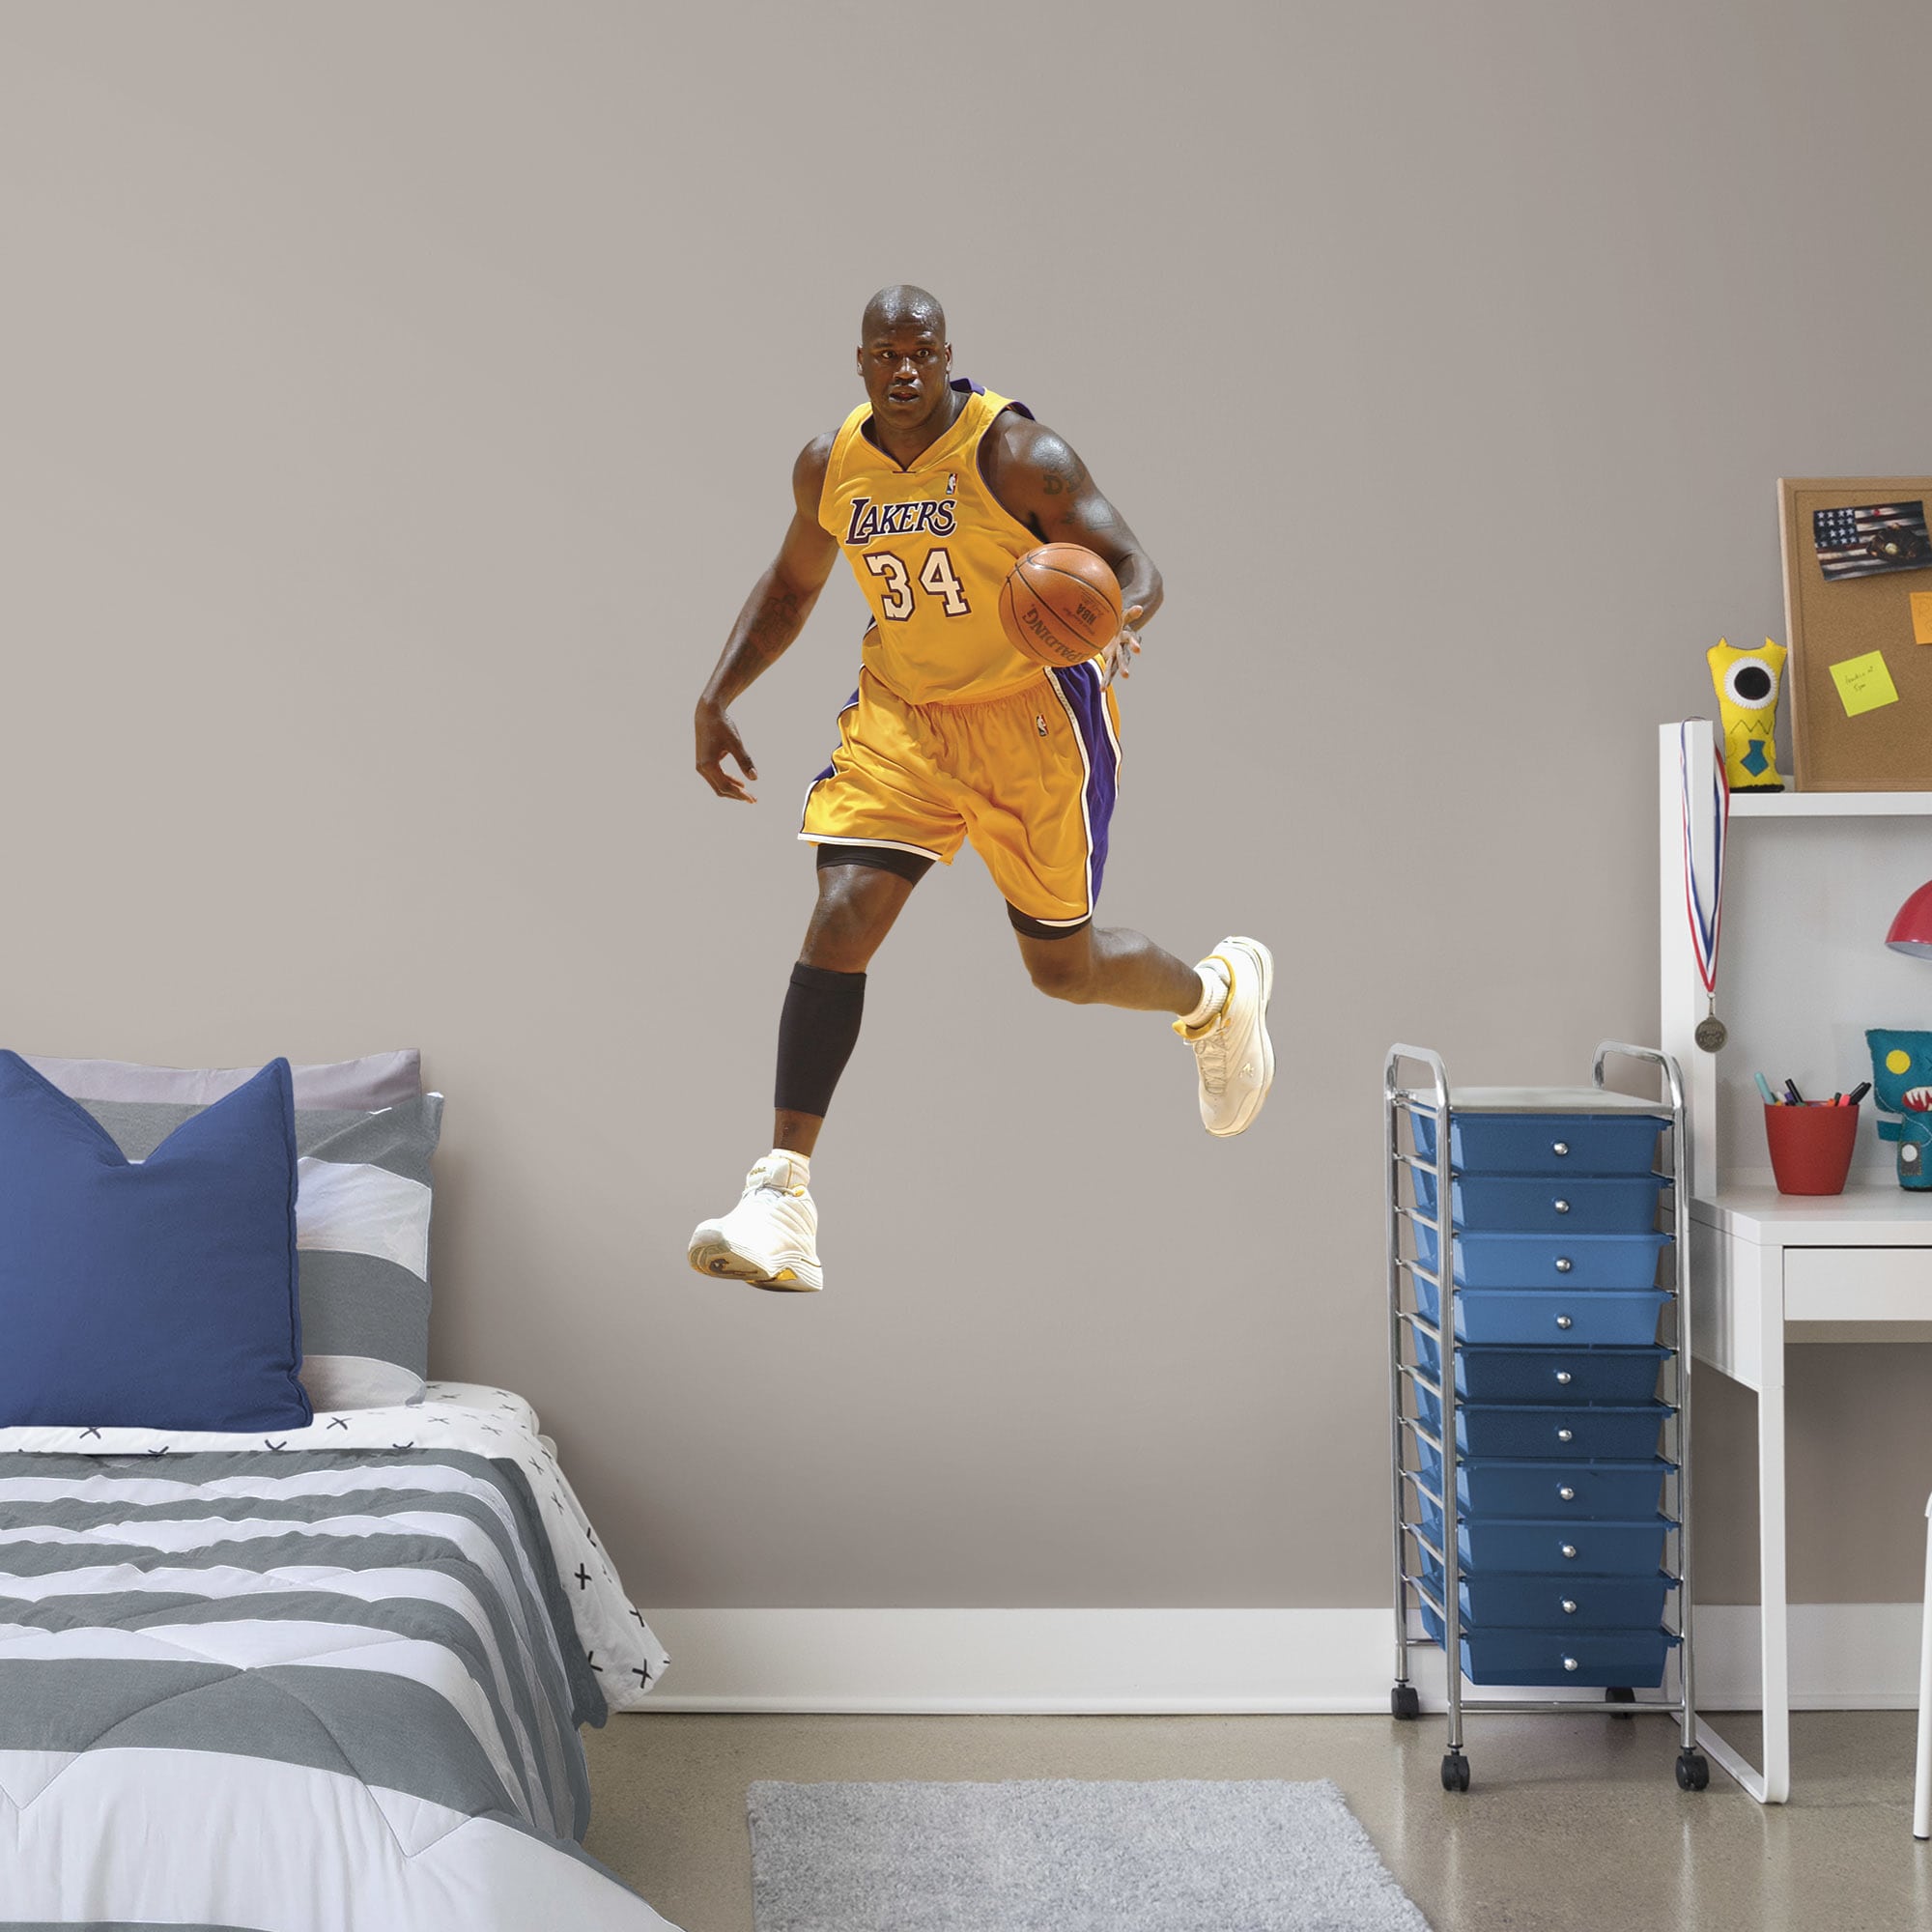 Shaquille ONeal for Los Angeles Lakers - Officially Licensed NBA Removable Wall Decal Giant Athlete + 2 Decals (30"W x 51"H) by